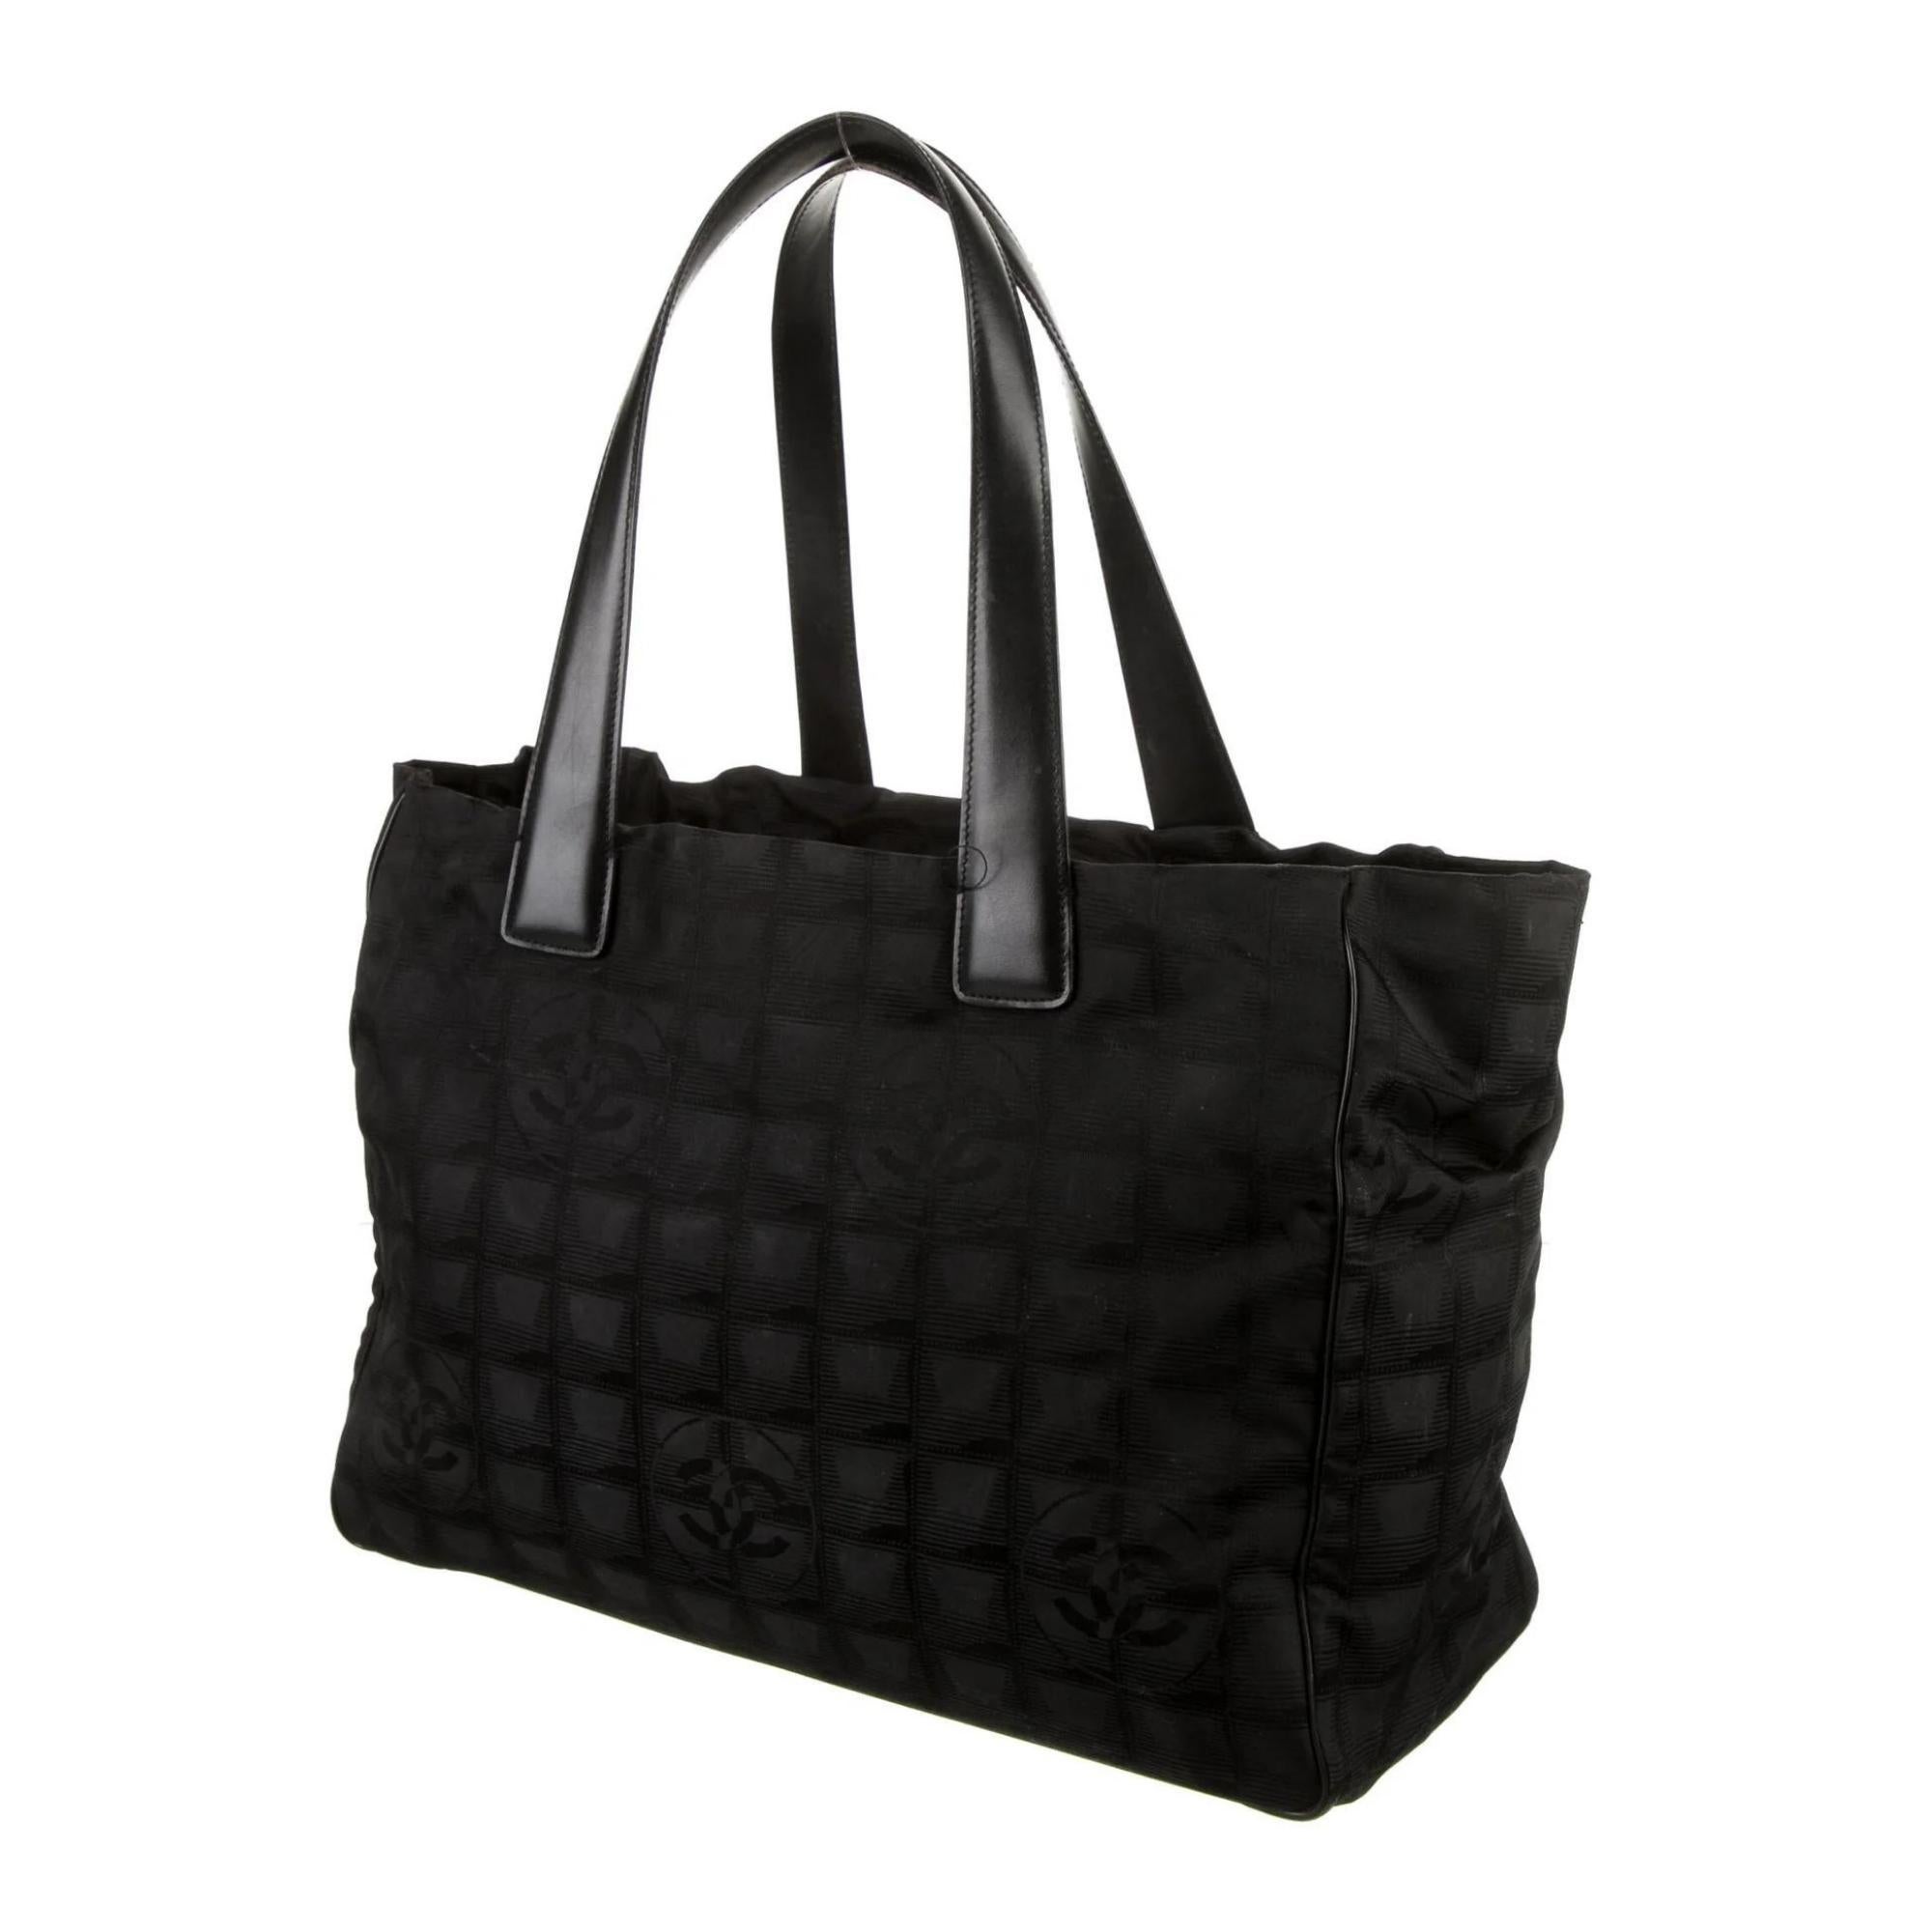 
This Chanel tote bag is made with black nylon with quilted squares and logo embellishment throughout. The bag features black leather trim, dual flat leather top handles, gold tone hardware, protective feet at base, an open top and black fabric